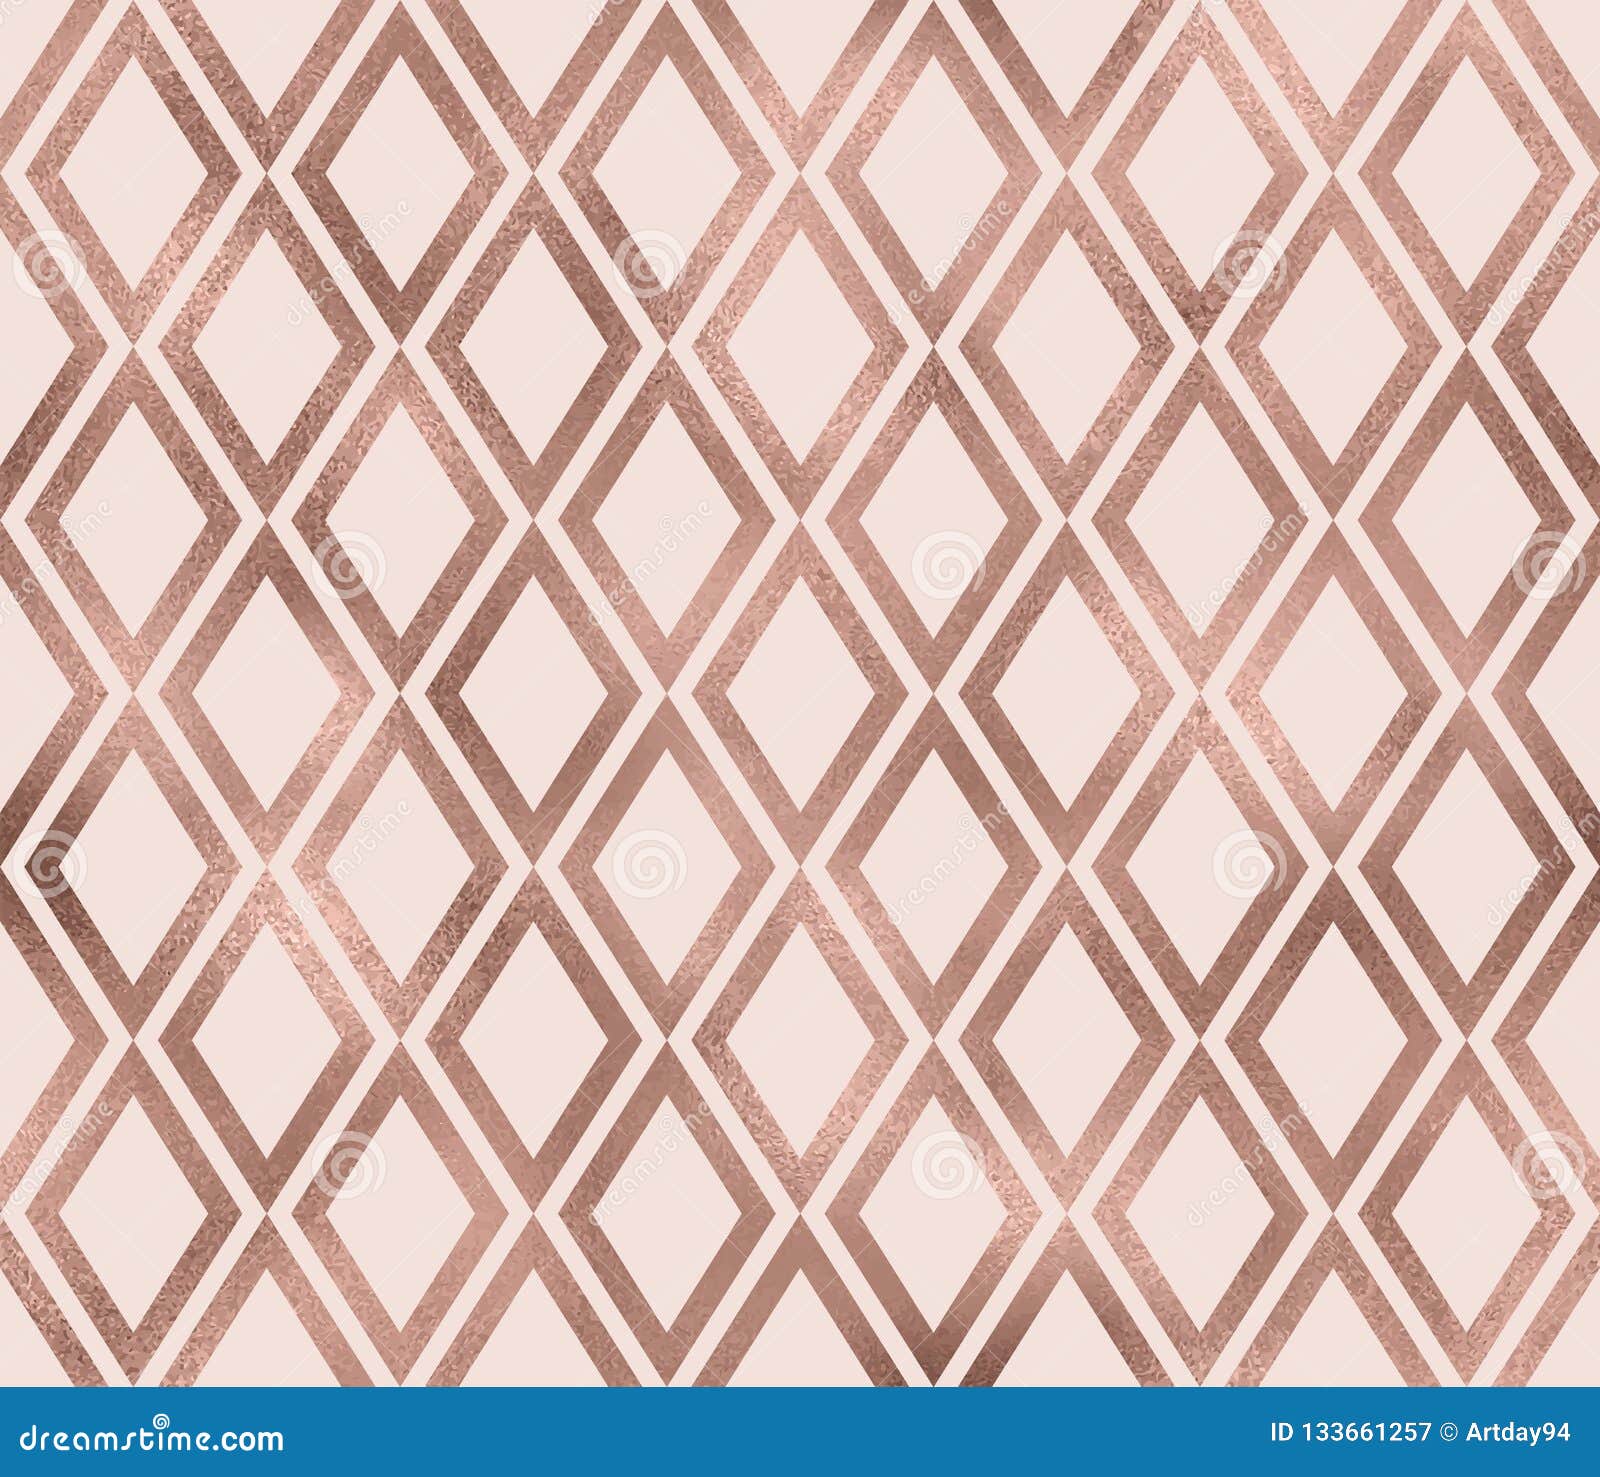 Sparkle Geometric Seamless Pattern With Rose Gold Foil